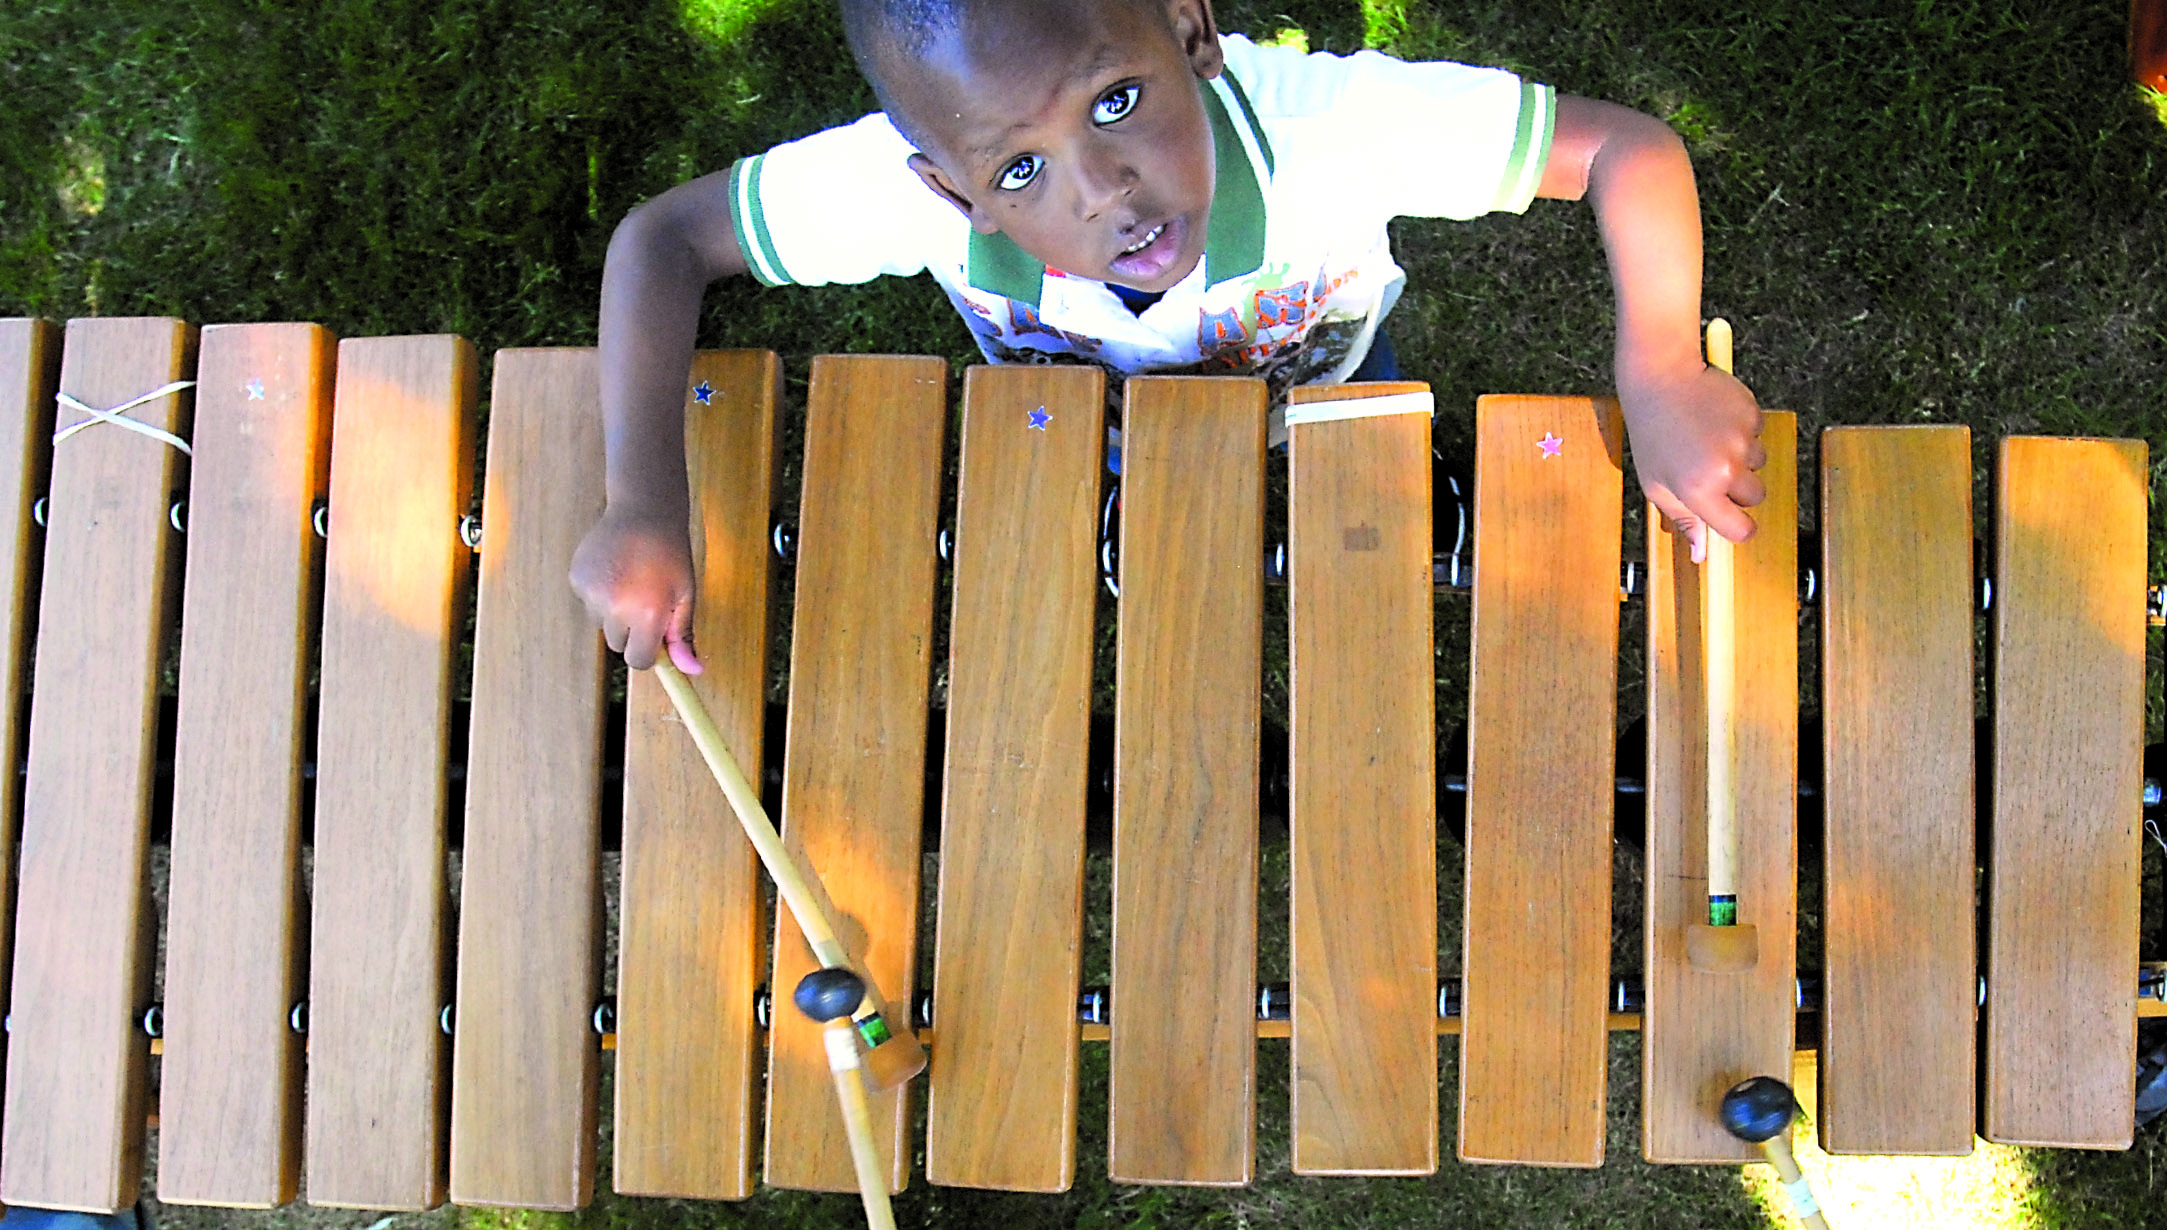 Three-year-old Gianni Vernet of Port Angeles tries his hand at playing a marimba prior to a performance by Sequimarimba on the front lawn of the Vern Burton Community Center in Port Angeles on Saturday. The center was the principal venue for the annual Juan de Fuca Festival of the Arts